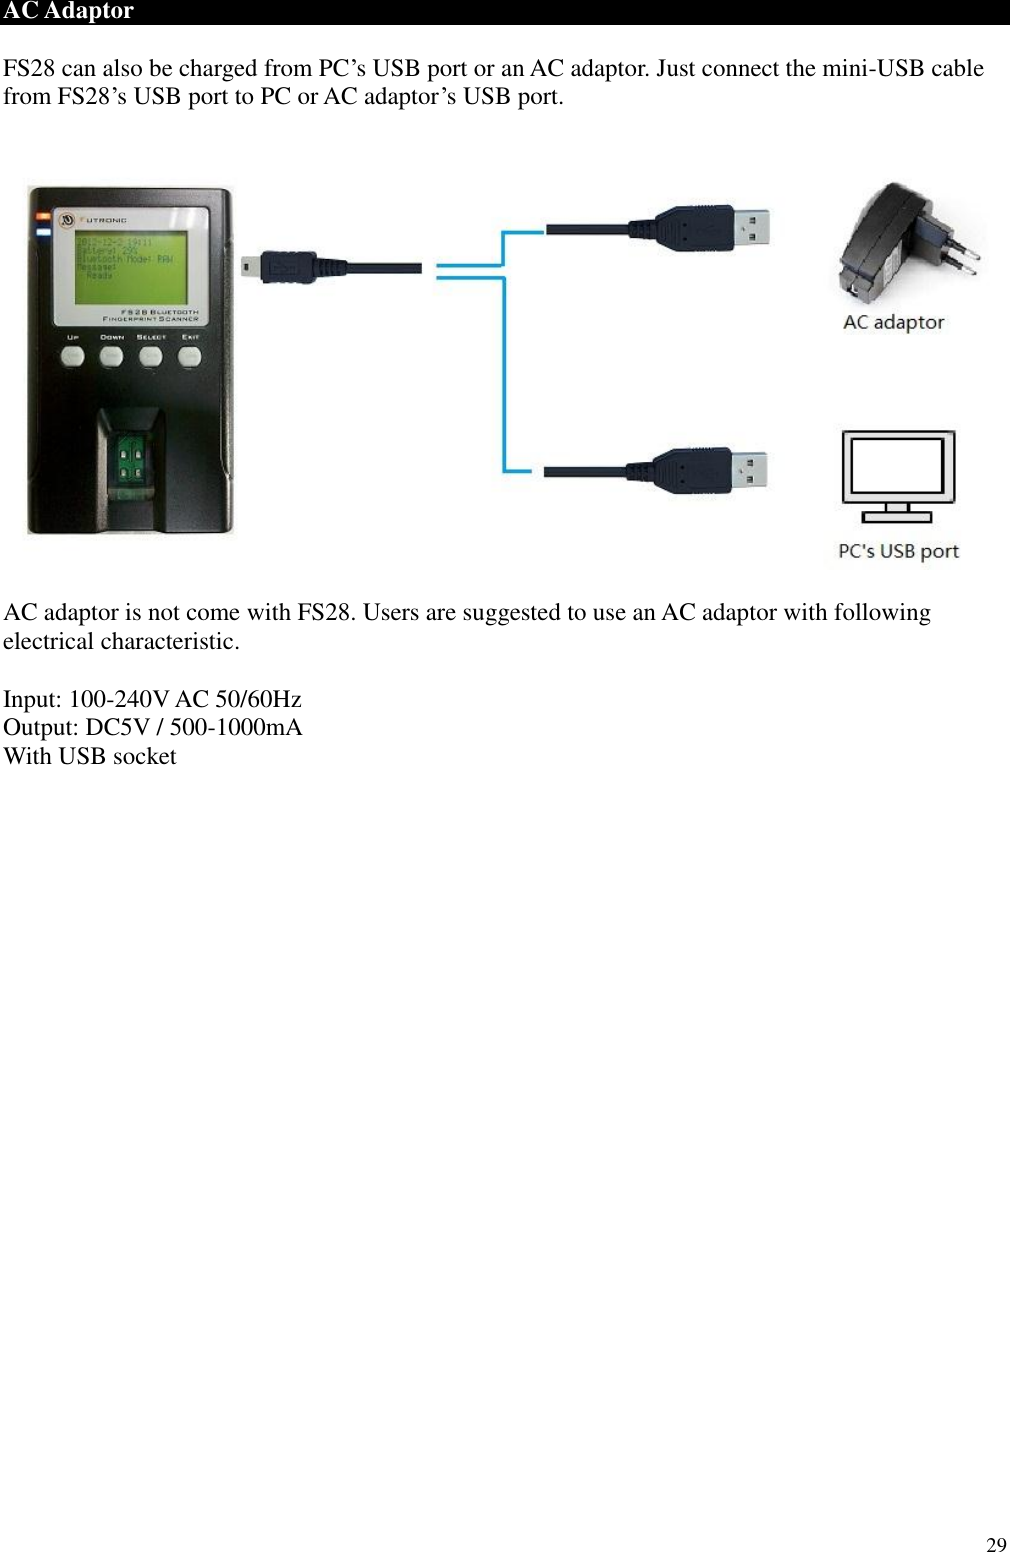  29 AC Adaptor  FS28 can also be charged from PC’s USB port or an AC adaptor. Just connect the mini-USB cable from FS28’s USB port to PC or AC adaptor’s USB port.    AC adaptor is not come with FS28. Users are suggested to use an AC adaptor with following electrical characteristic.  Input: 100-240V AC 50/60Hz Output: DC5V / 500-1000mA With USB socket                          